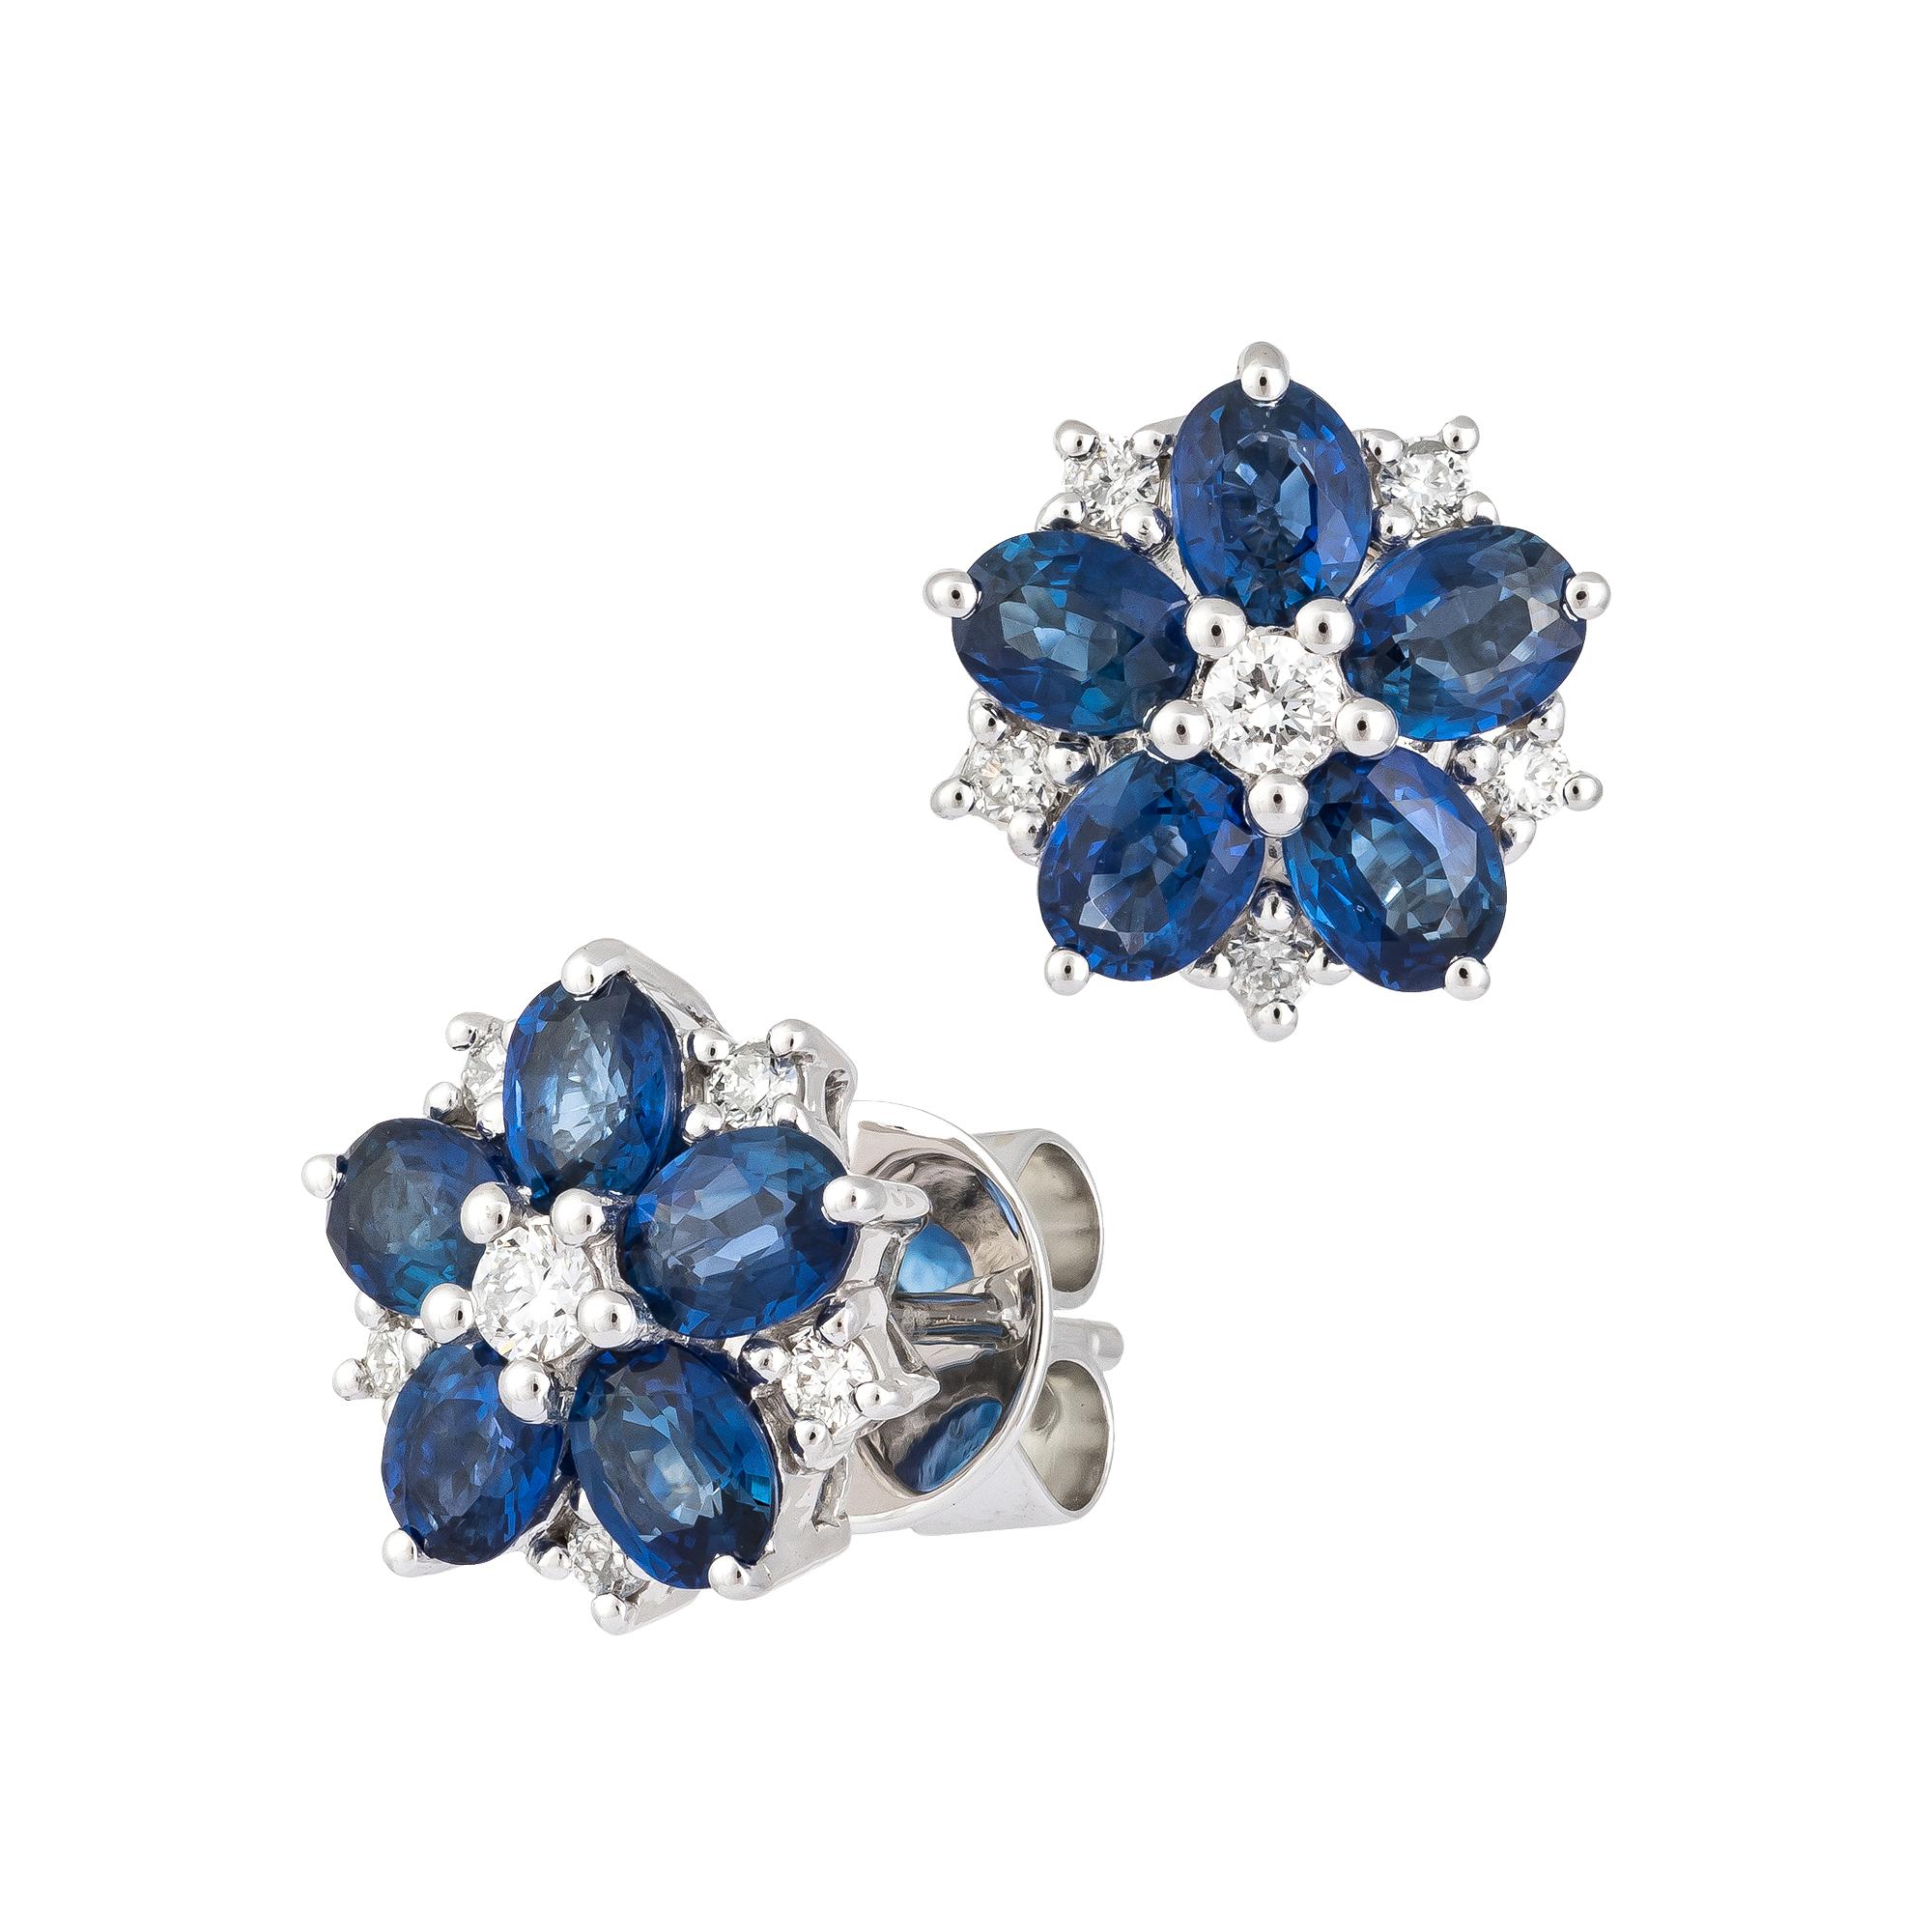 EARRING 18K White Gold Blue Sapphire 2.02 Cts/10 Pieces , D 0.21 Cts/12 Pieces
